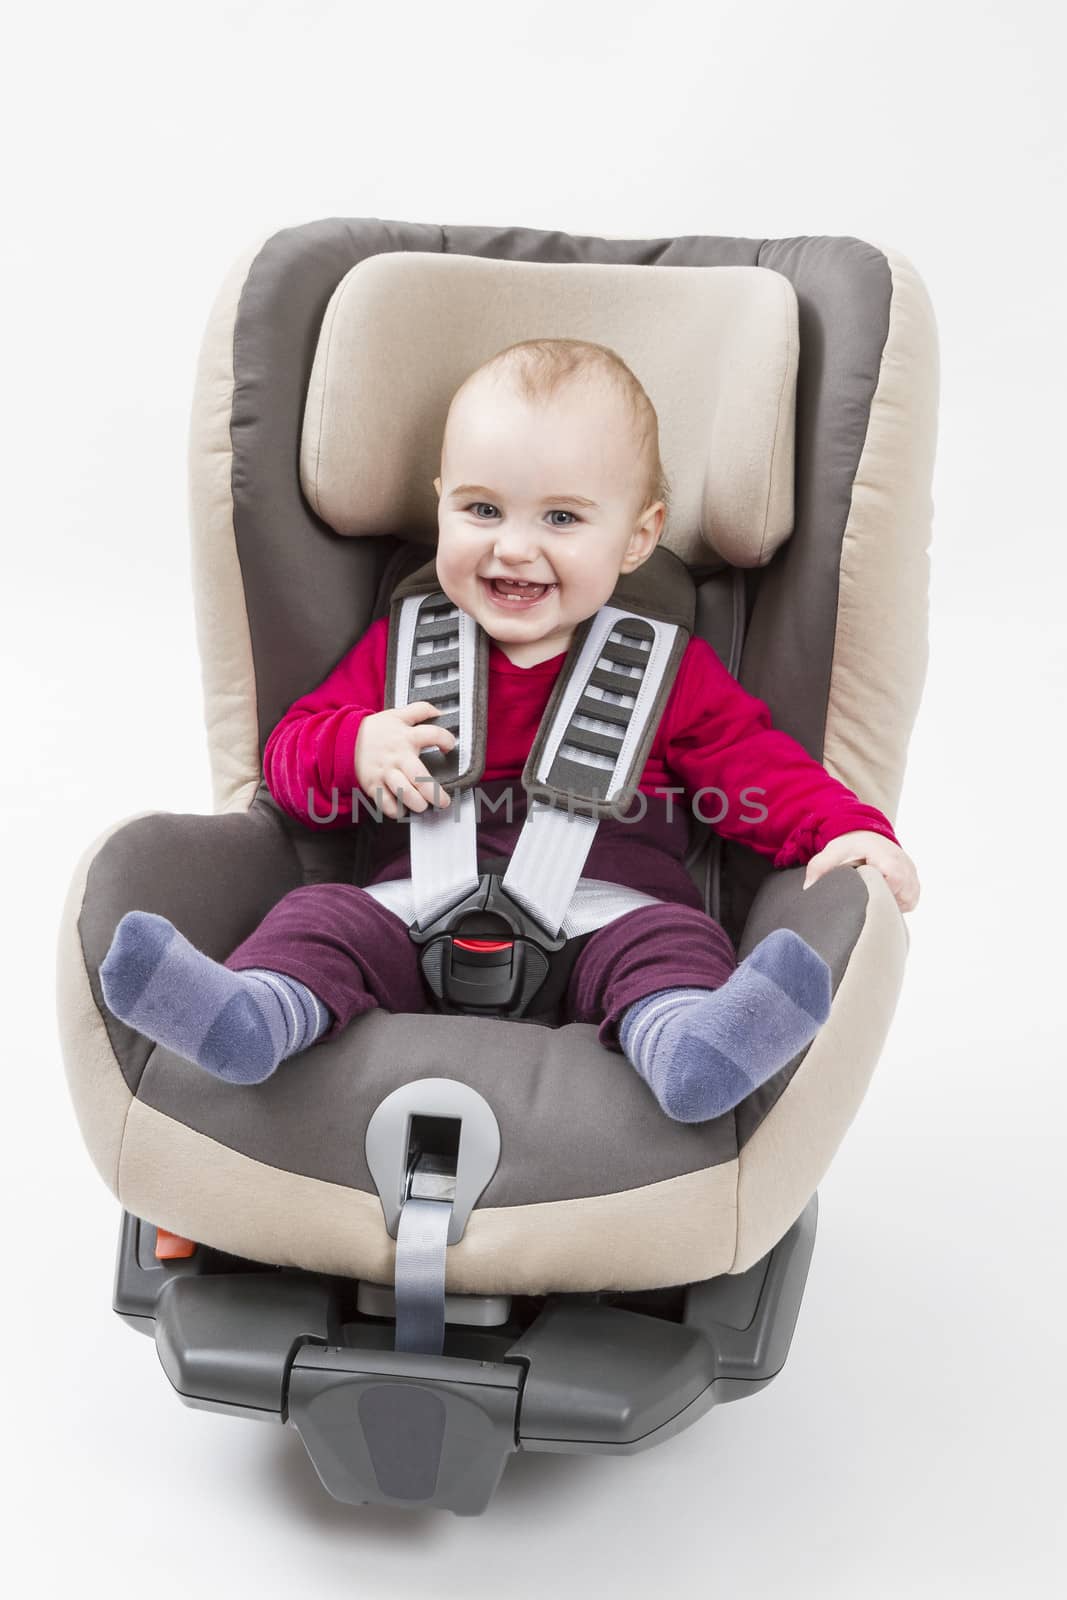 happy child in booster seat for a car in light background by gewoldi